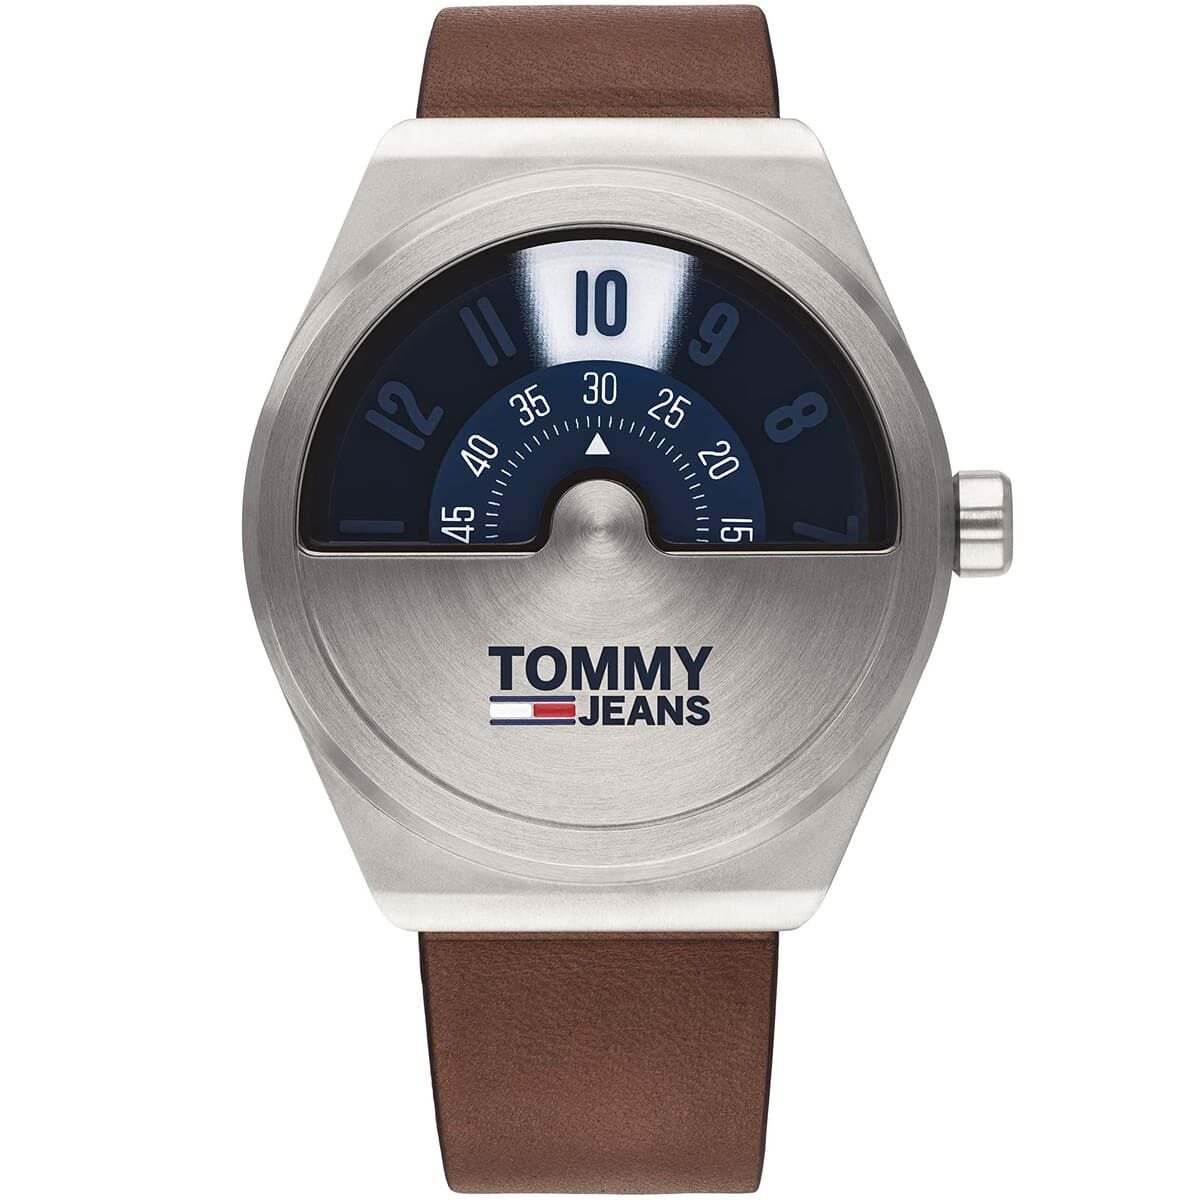 Tommy Hilfiger Watch For Men 1791669 | Catchy watches